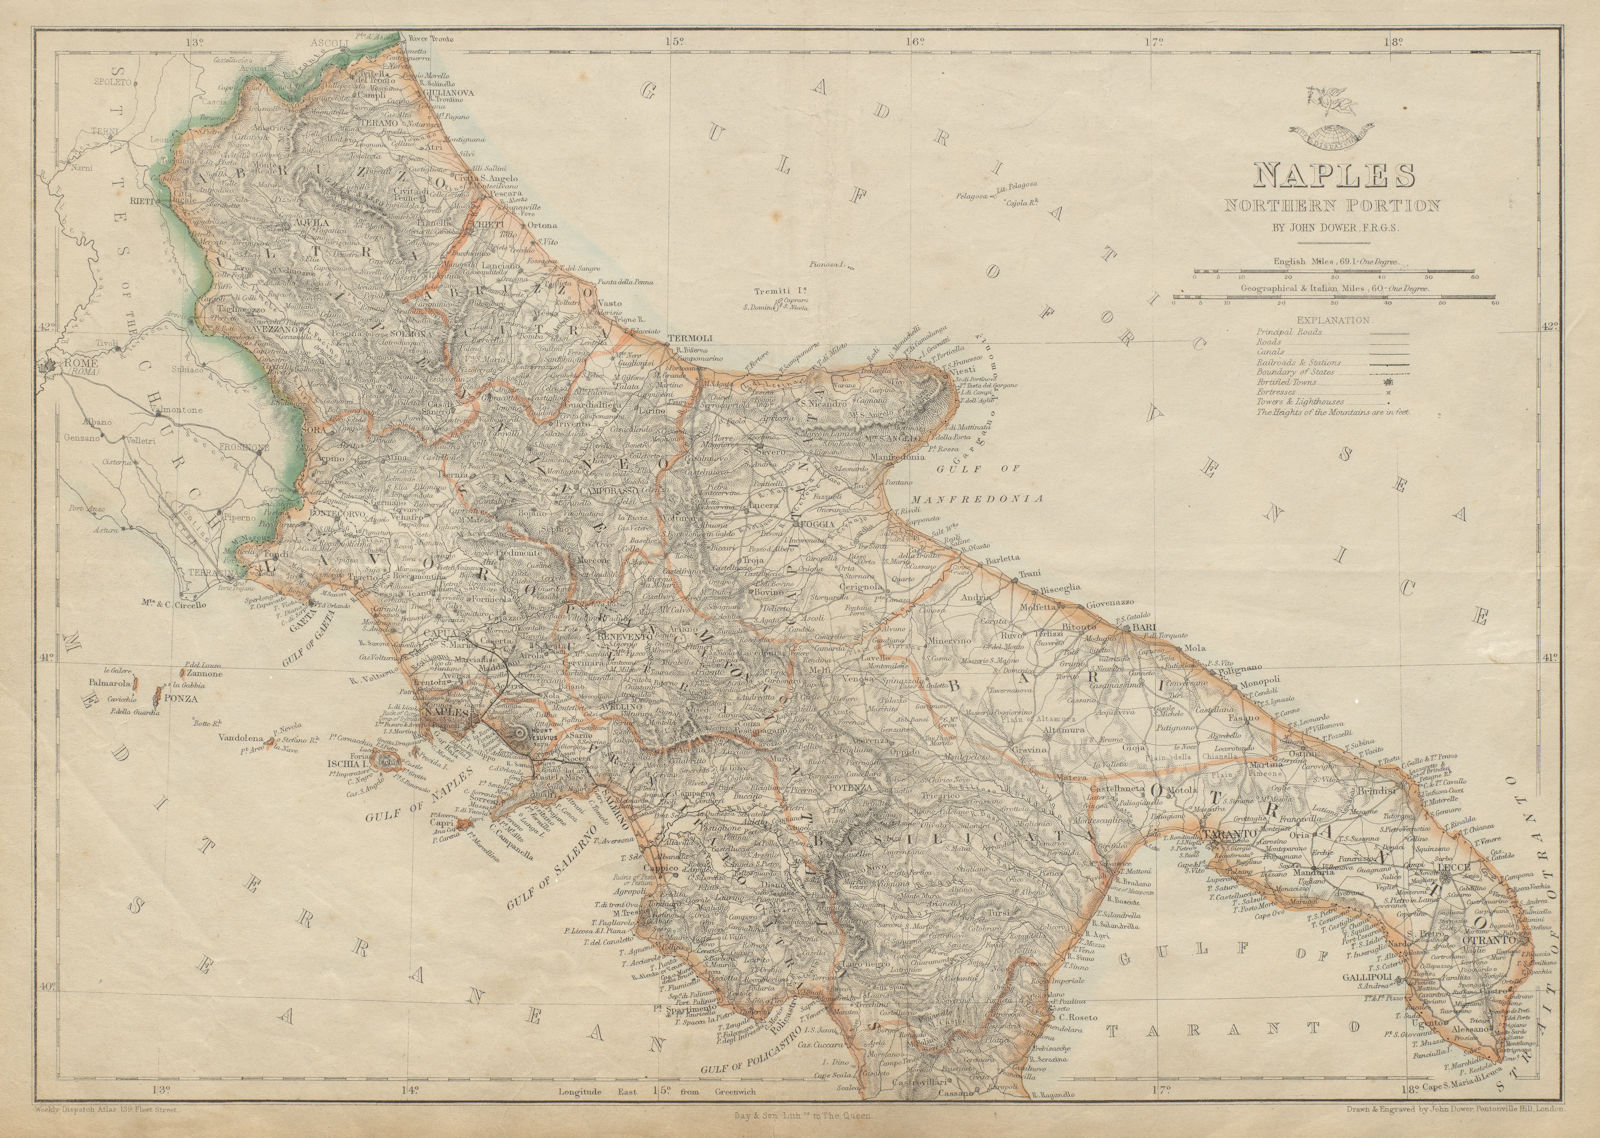 KINGDOM OF NAPLES/TWO SICILIES North. Southern Italy. DOWER. Dispatch 1862 map